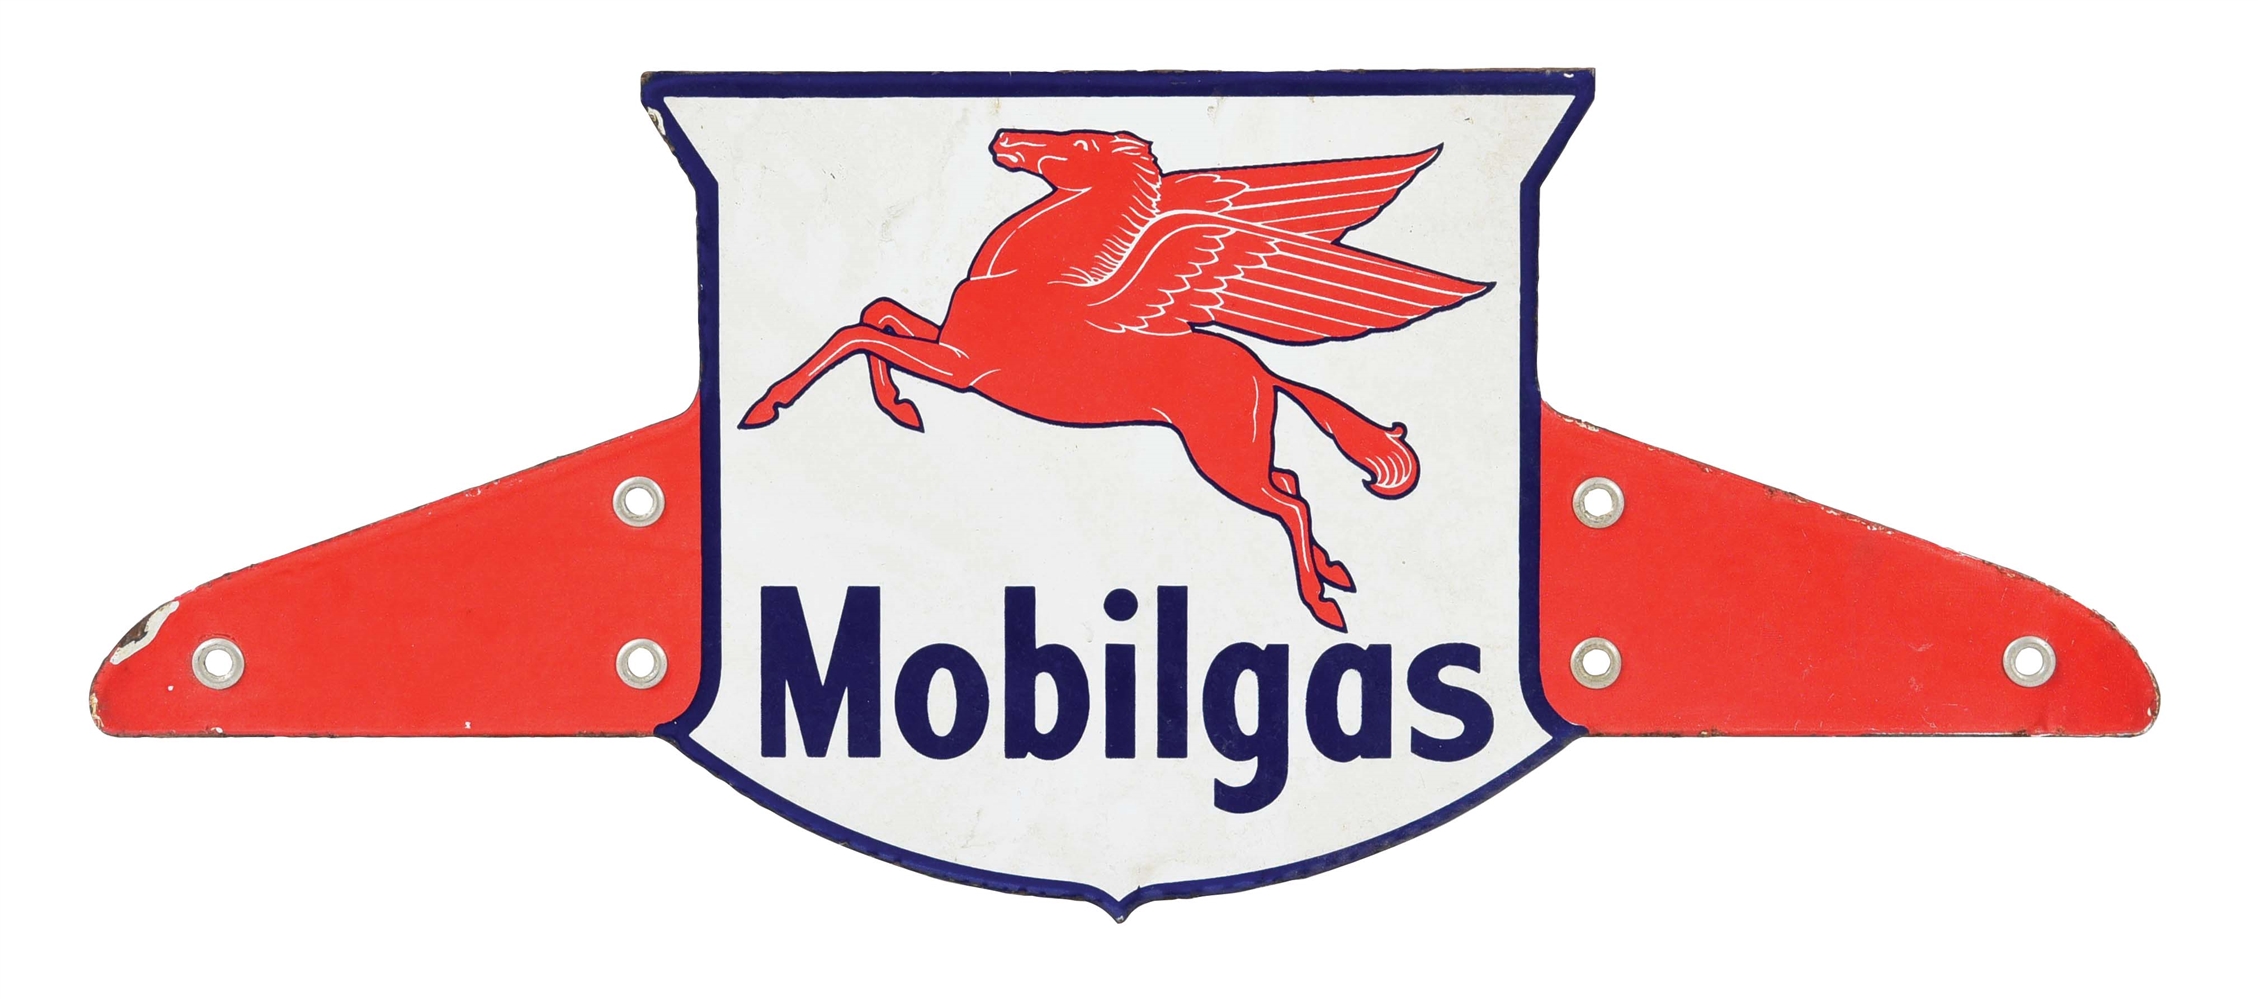 RARE MOBILGAS PORCELAIN DELIVERY TRUCK TOPPER SIGN W/ PEGASUS GRAPHIC. 